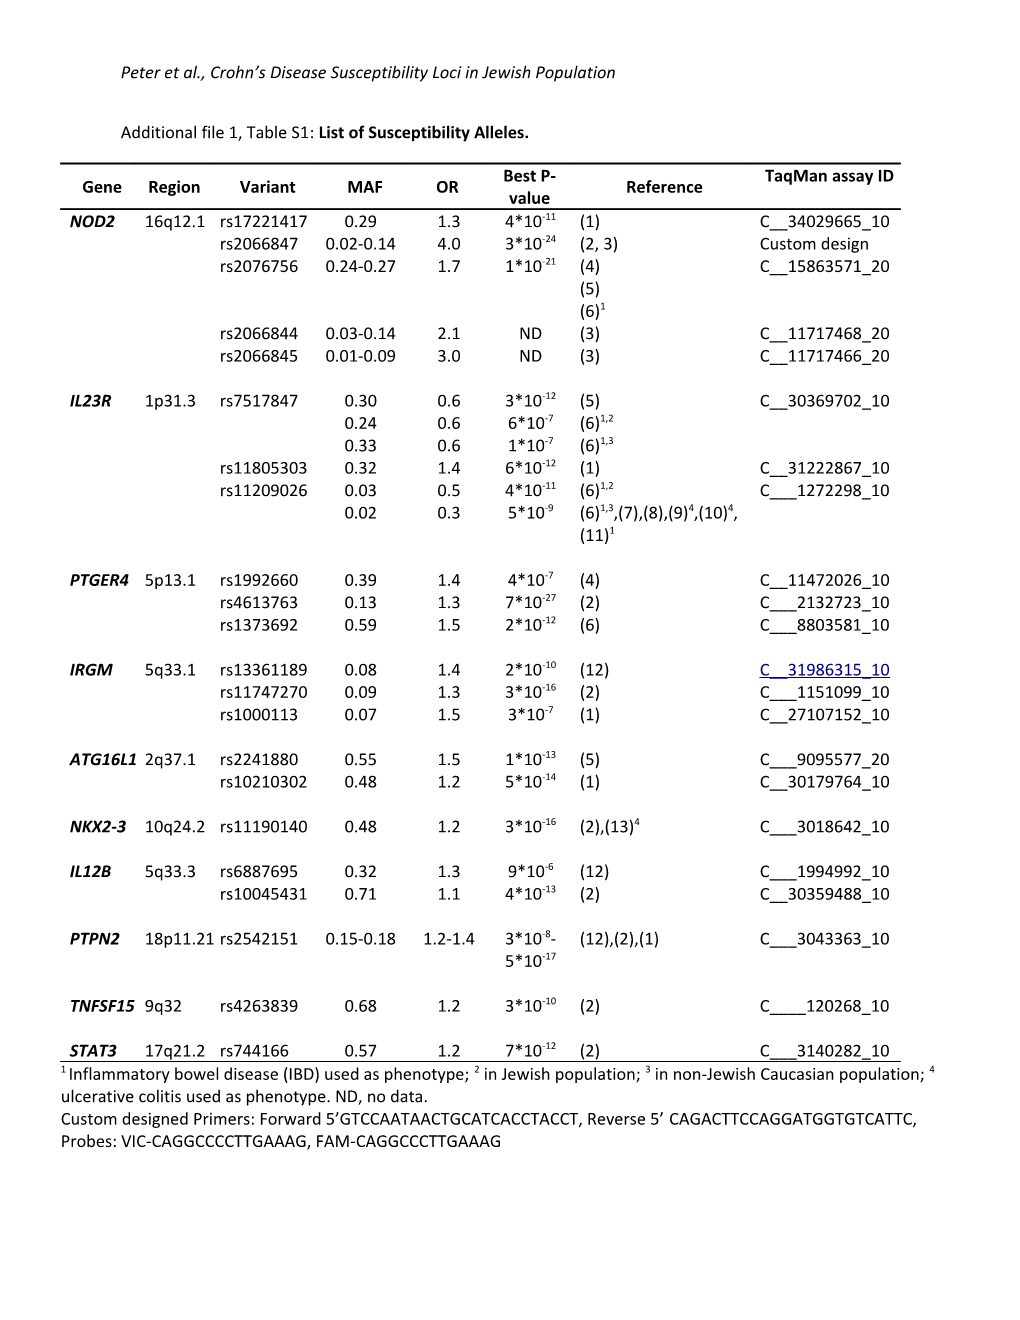 Table X: List of Susceptibility Alleles